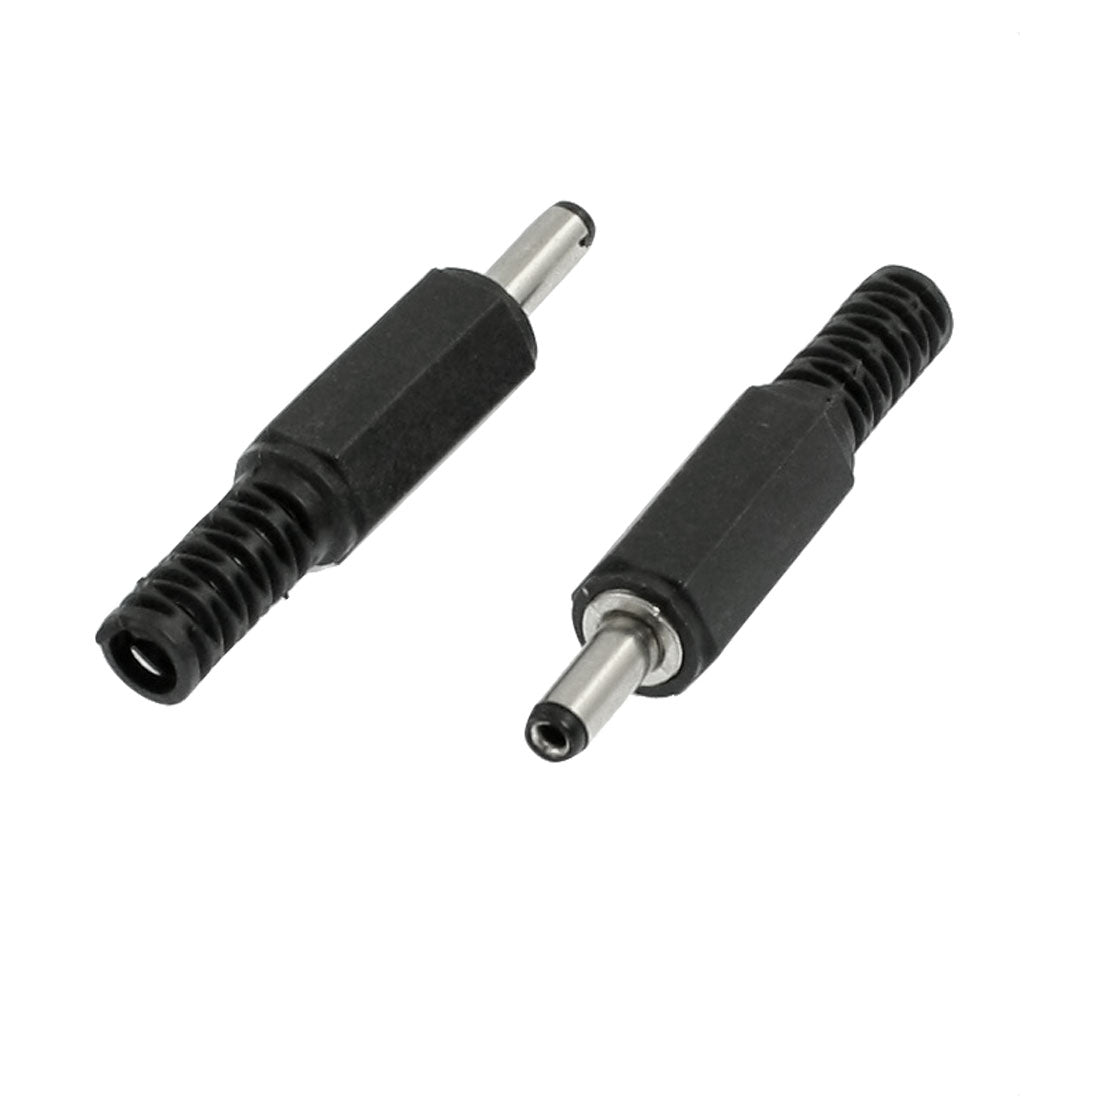 uxcell Uxcell 2 Pcs Black Silver Tone 1.35mm x 3.5mm DC Power Male Connector Jack Adapter